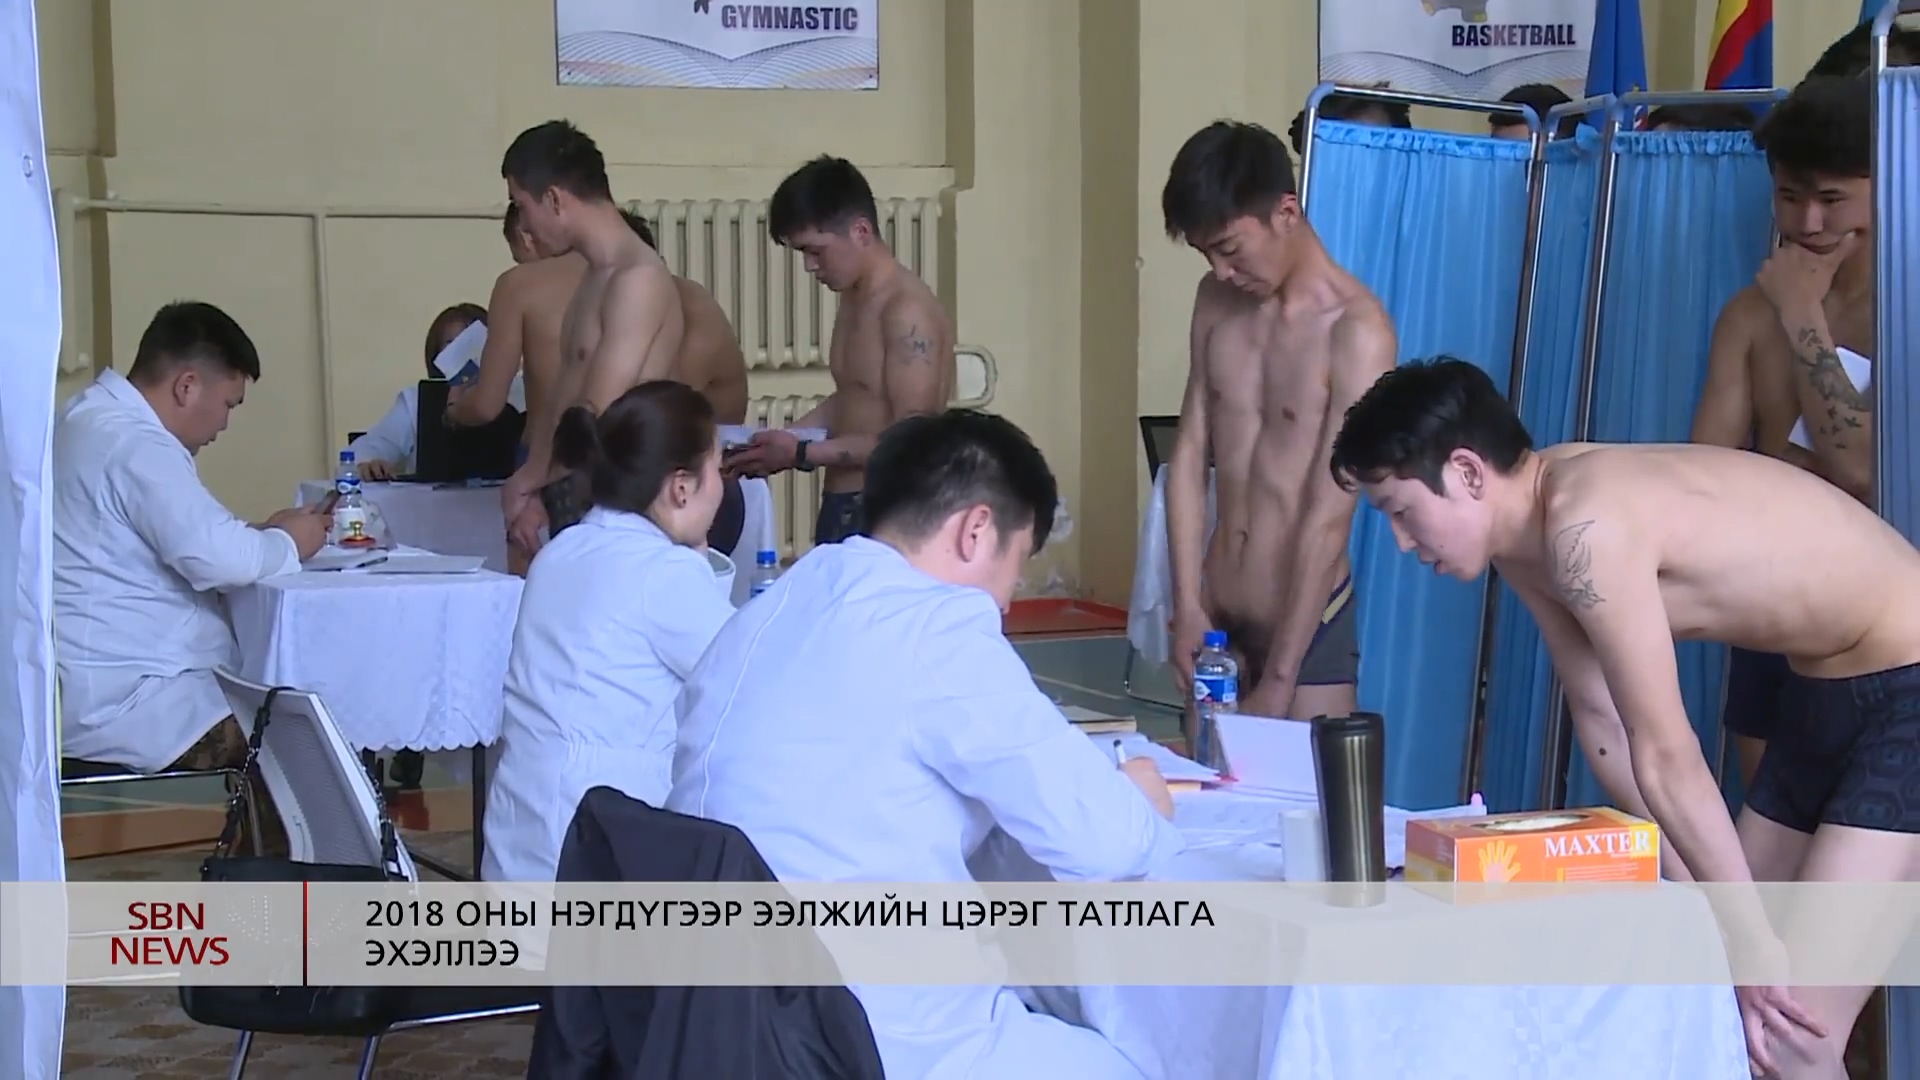 physical examination by female